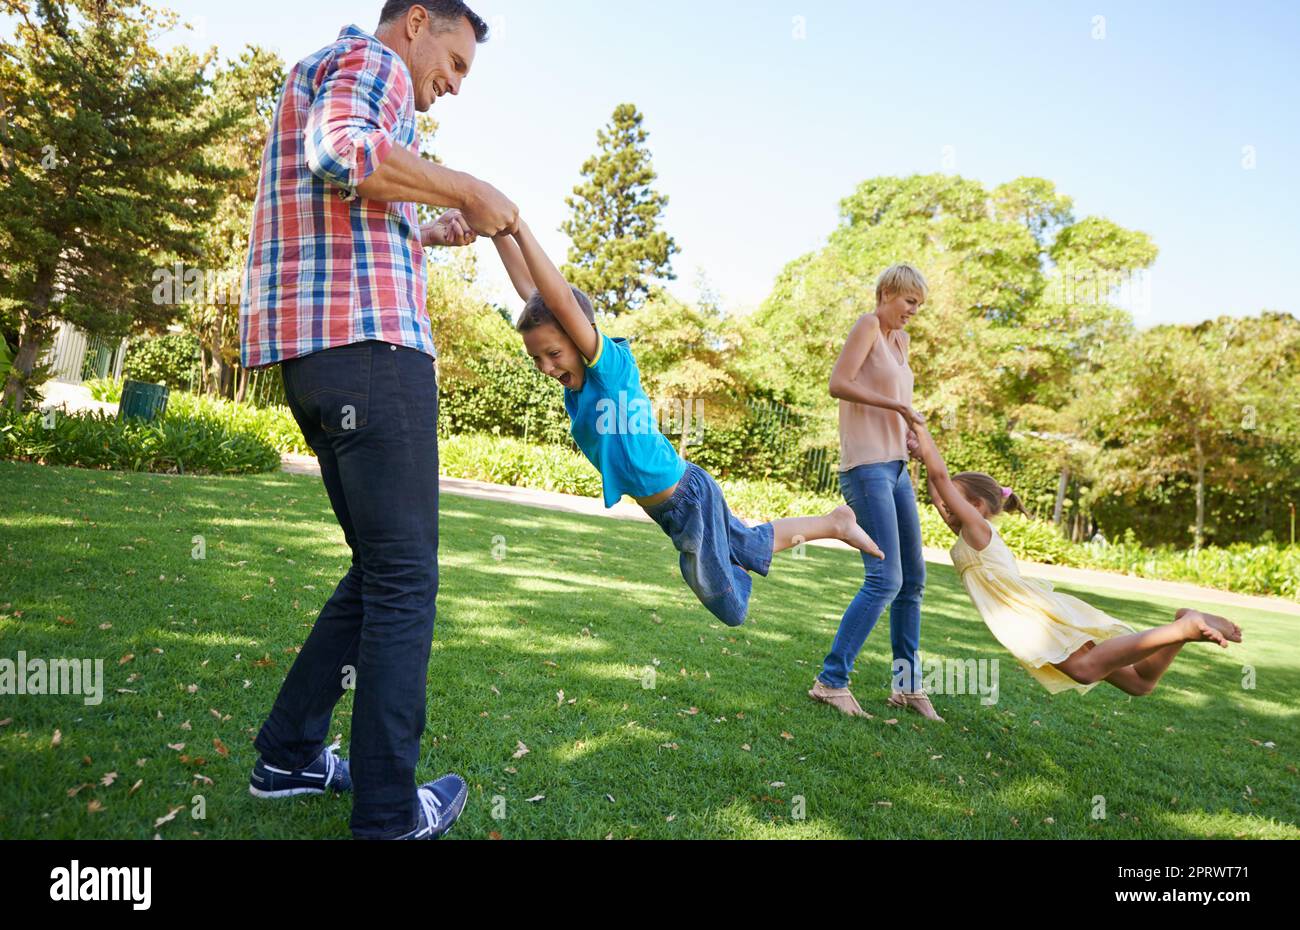 Who needs a playground when you have mom and dad around. Two parents swinging their young children around as they play in the park on a beautiful sunny day. Stock Photo